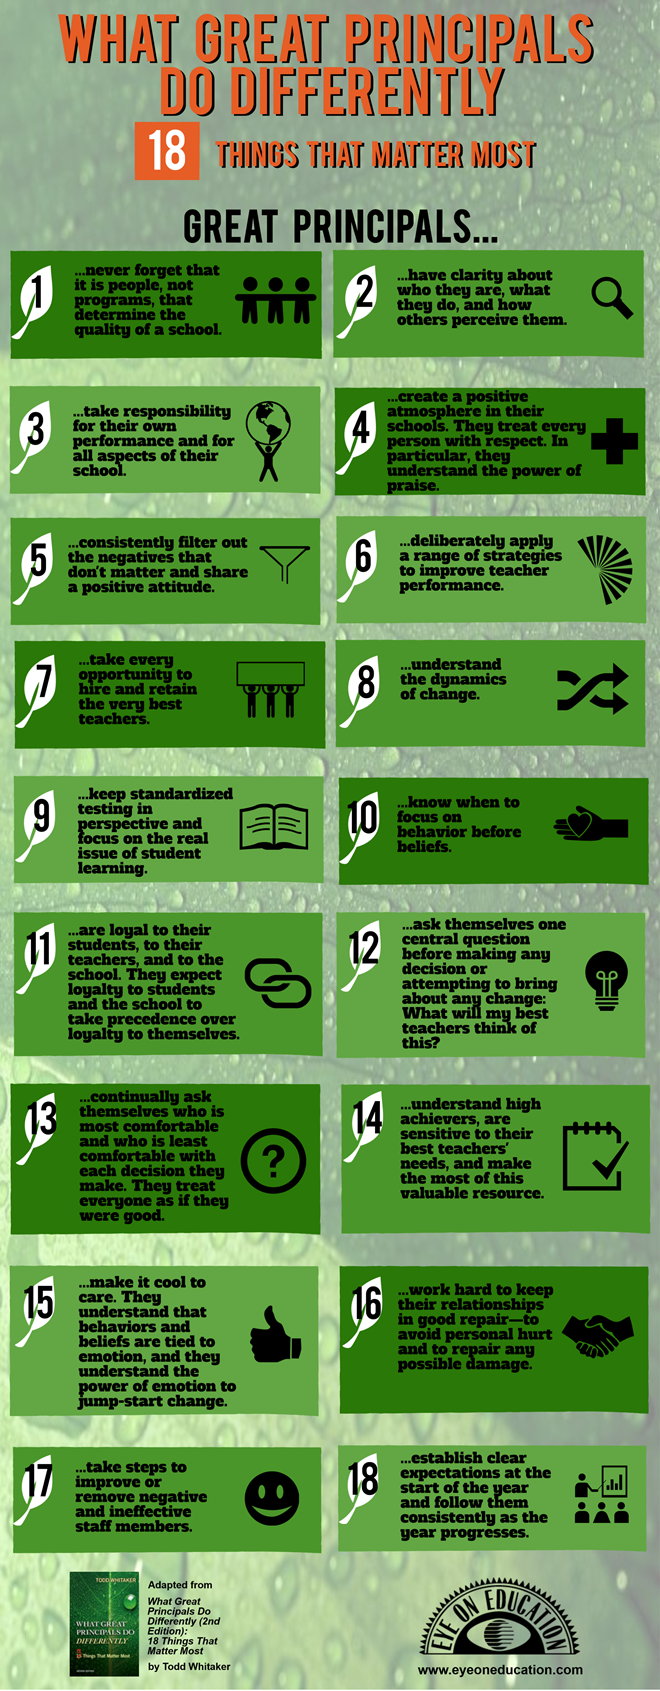 18 Things Great Principals Do Differently
        ~ 
        Educational Technology and Mobile Learning